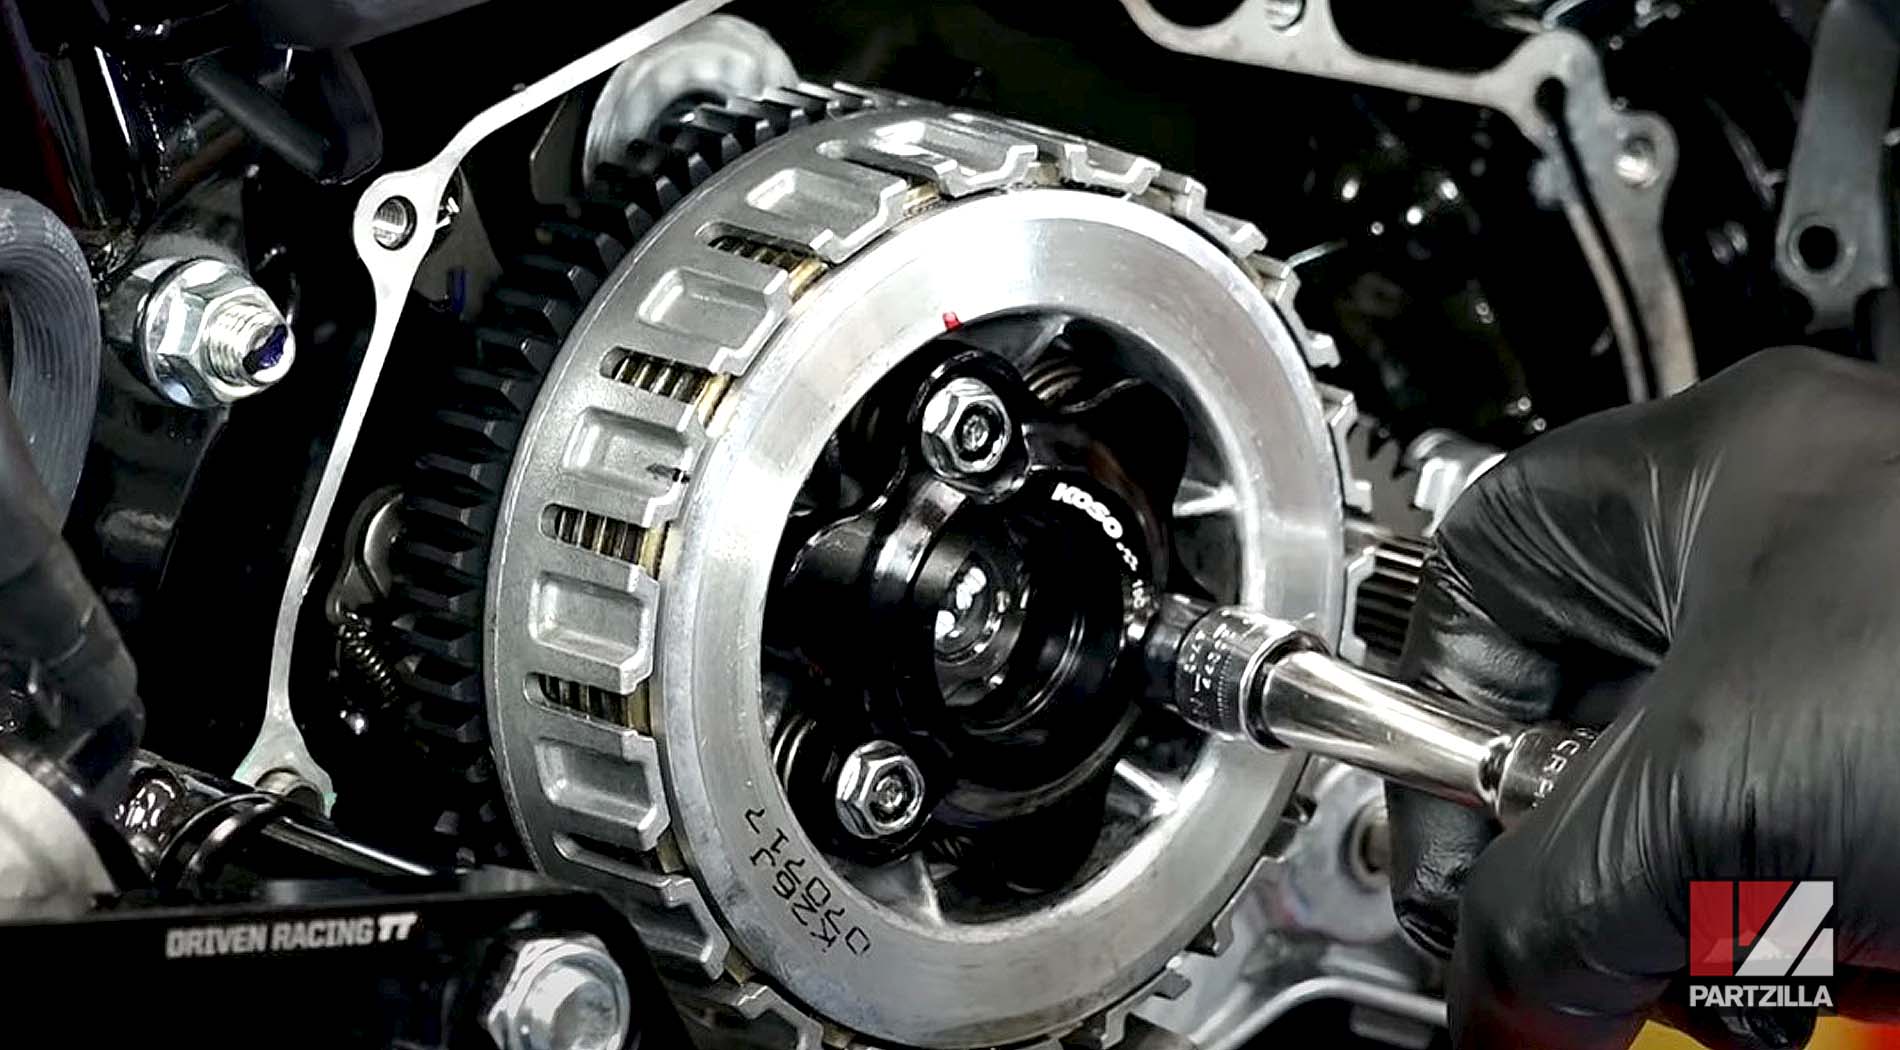 Honda Grom Clutch Kit and Oil Pump Installation